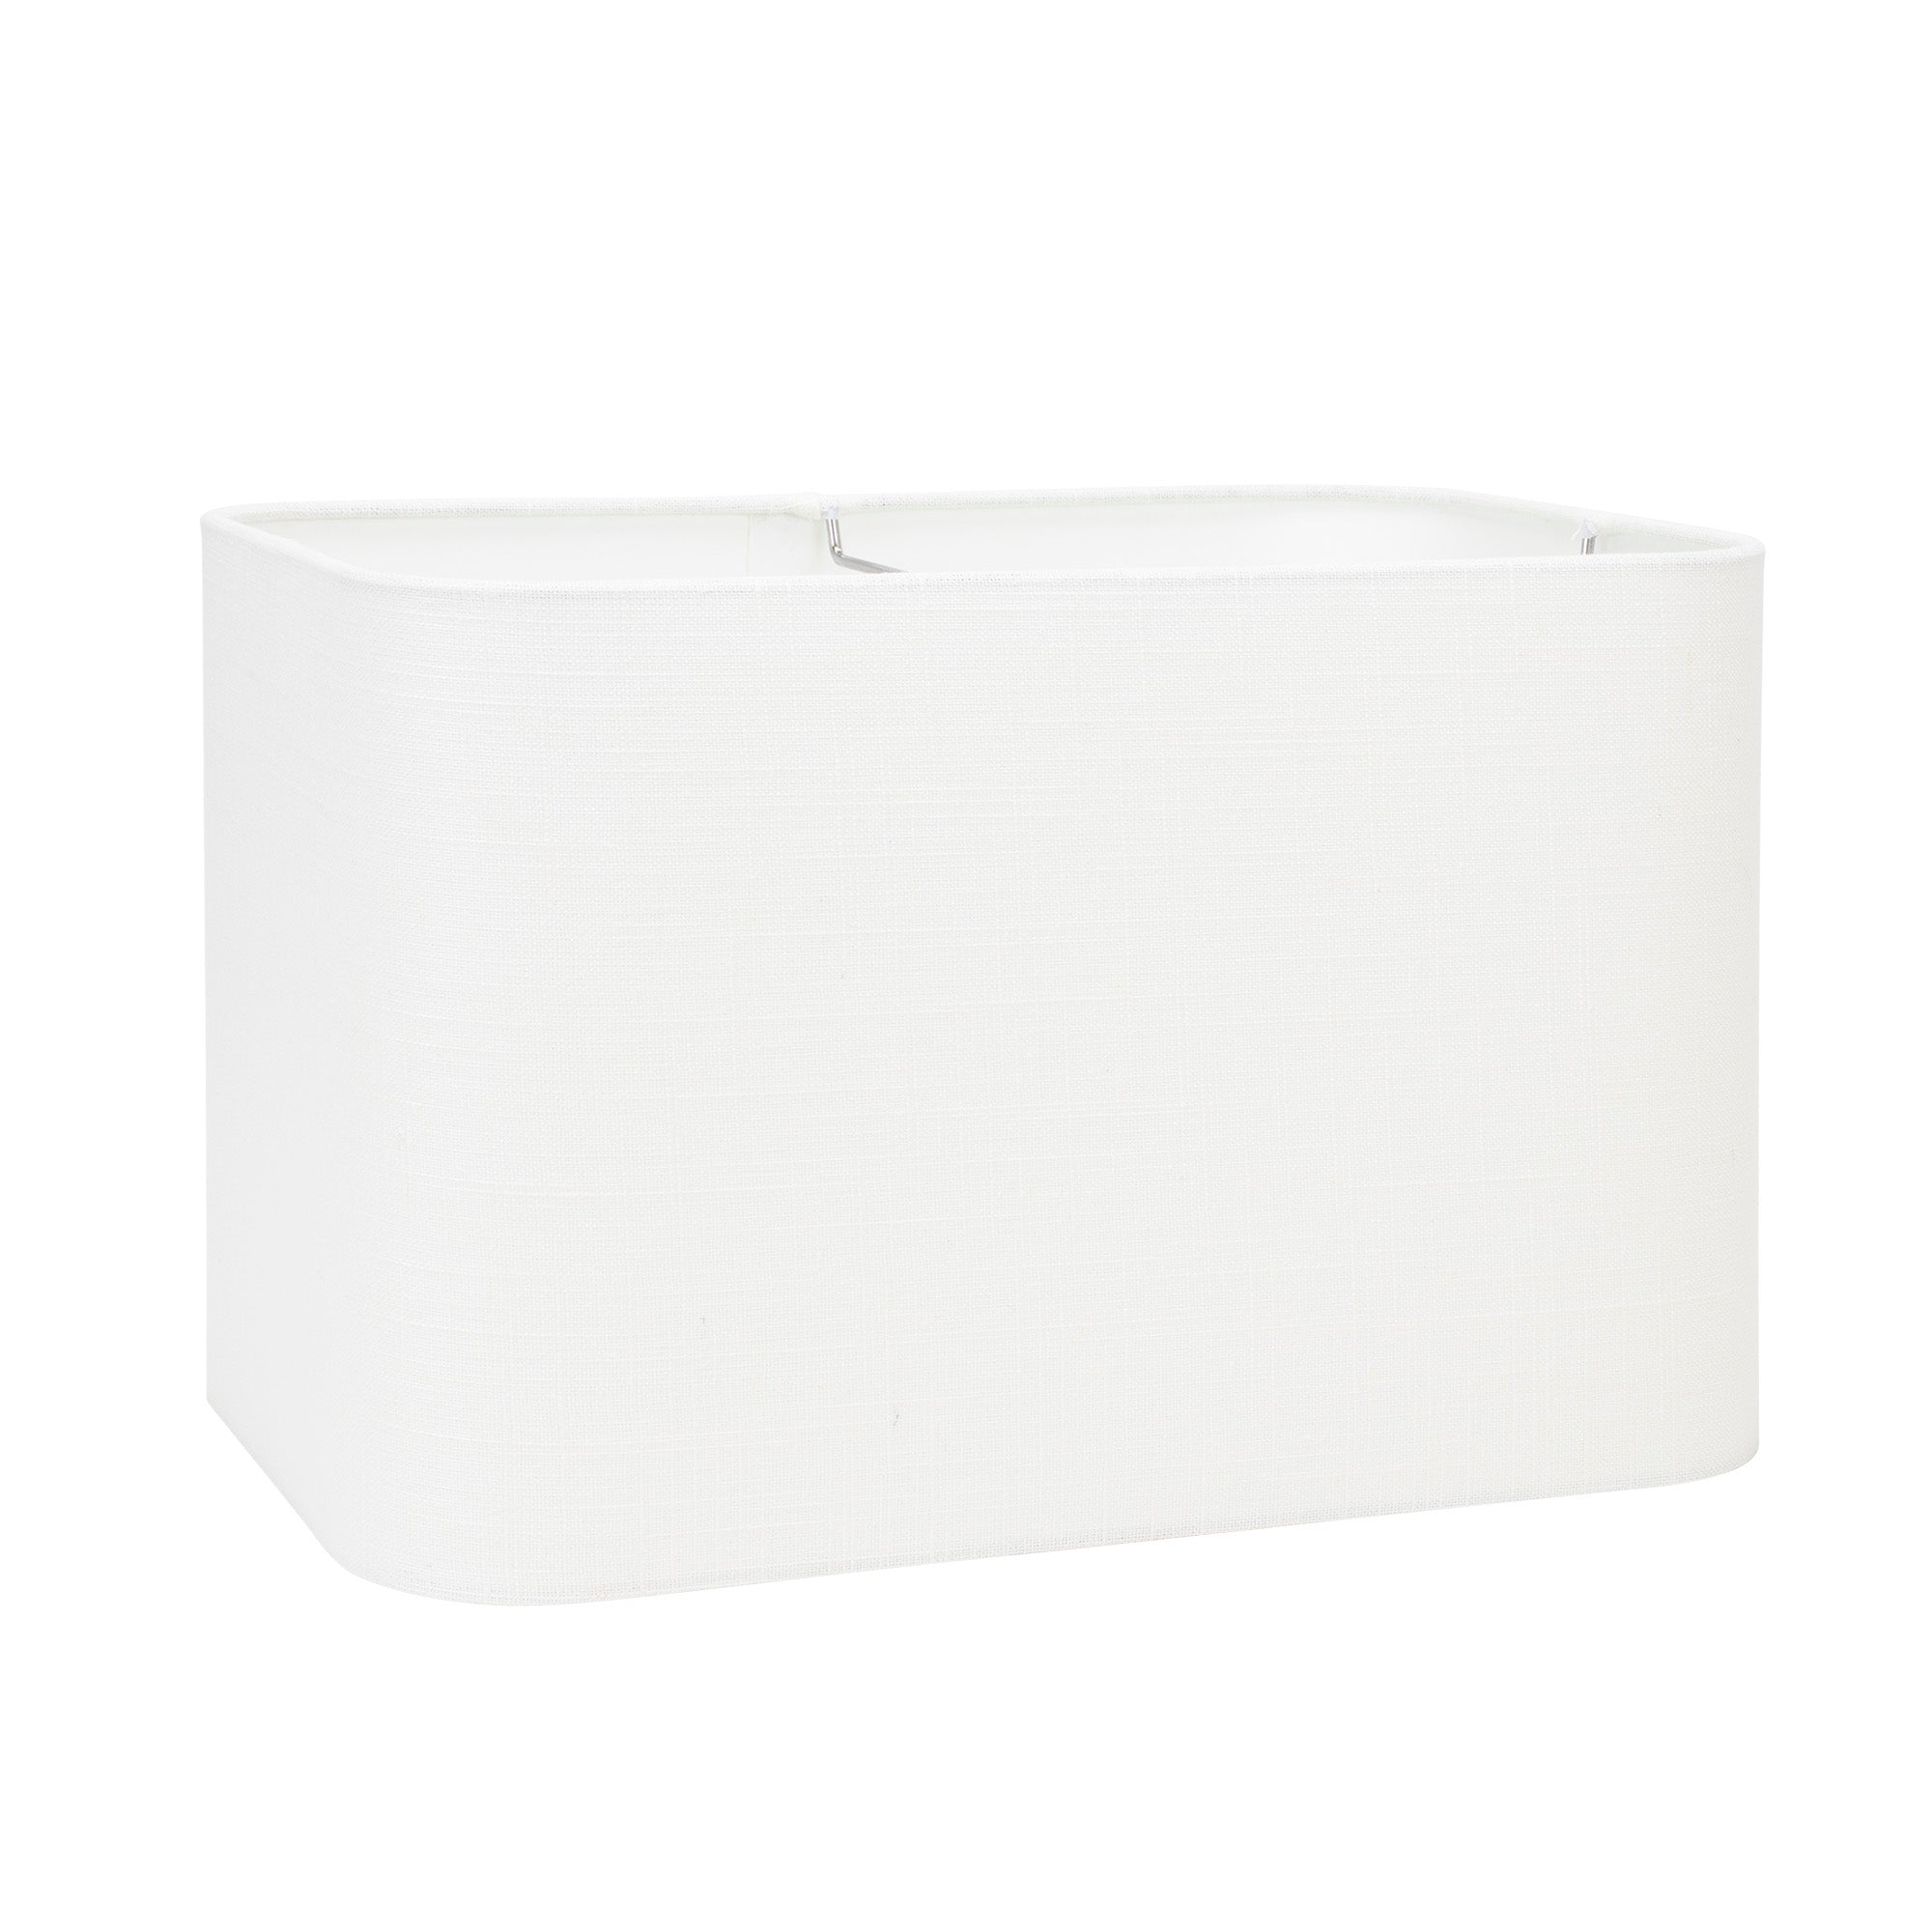 14" x 9" x 9" Rounded Rectangular Hardback White Casual Linen Shade - Couture Lamps